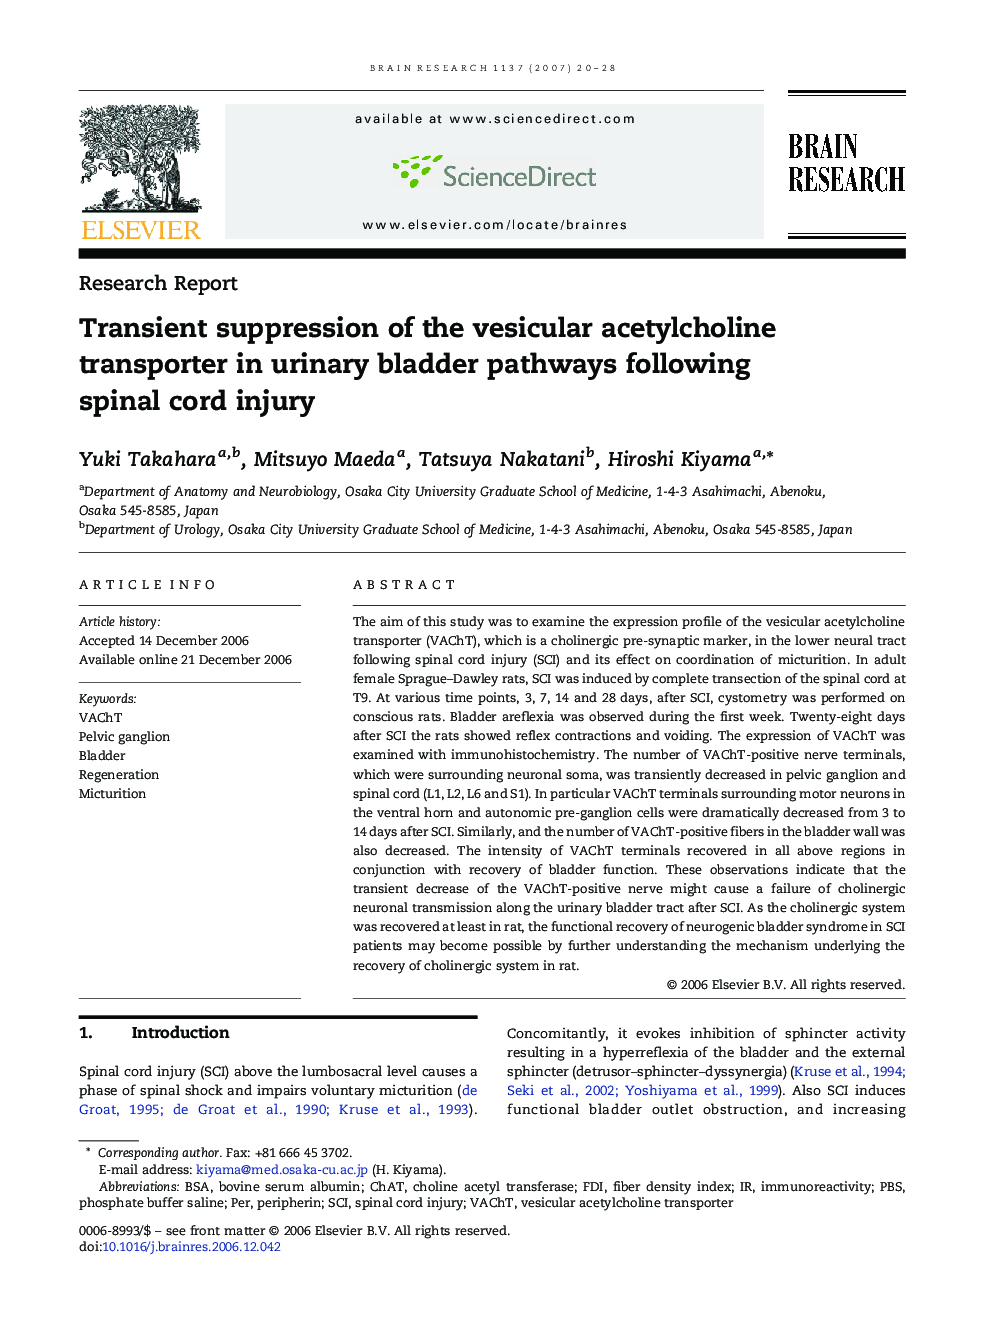 Transient suppression of the vesicular acetylcholine transporter in urinary bladder pathways following spinal cord injury